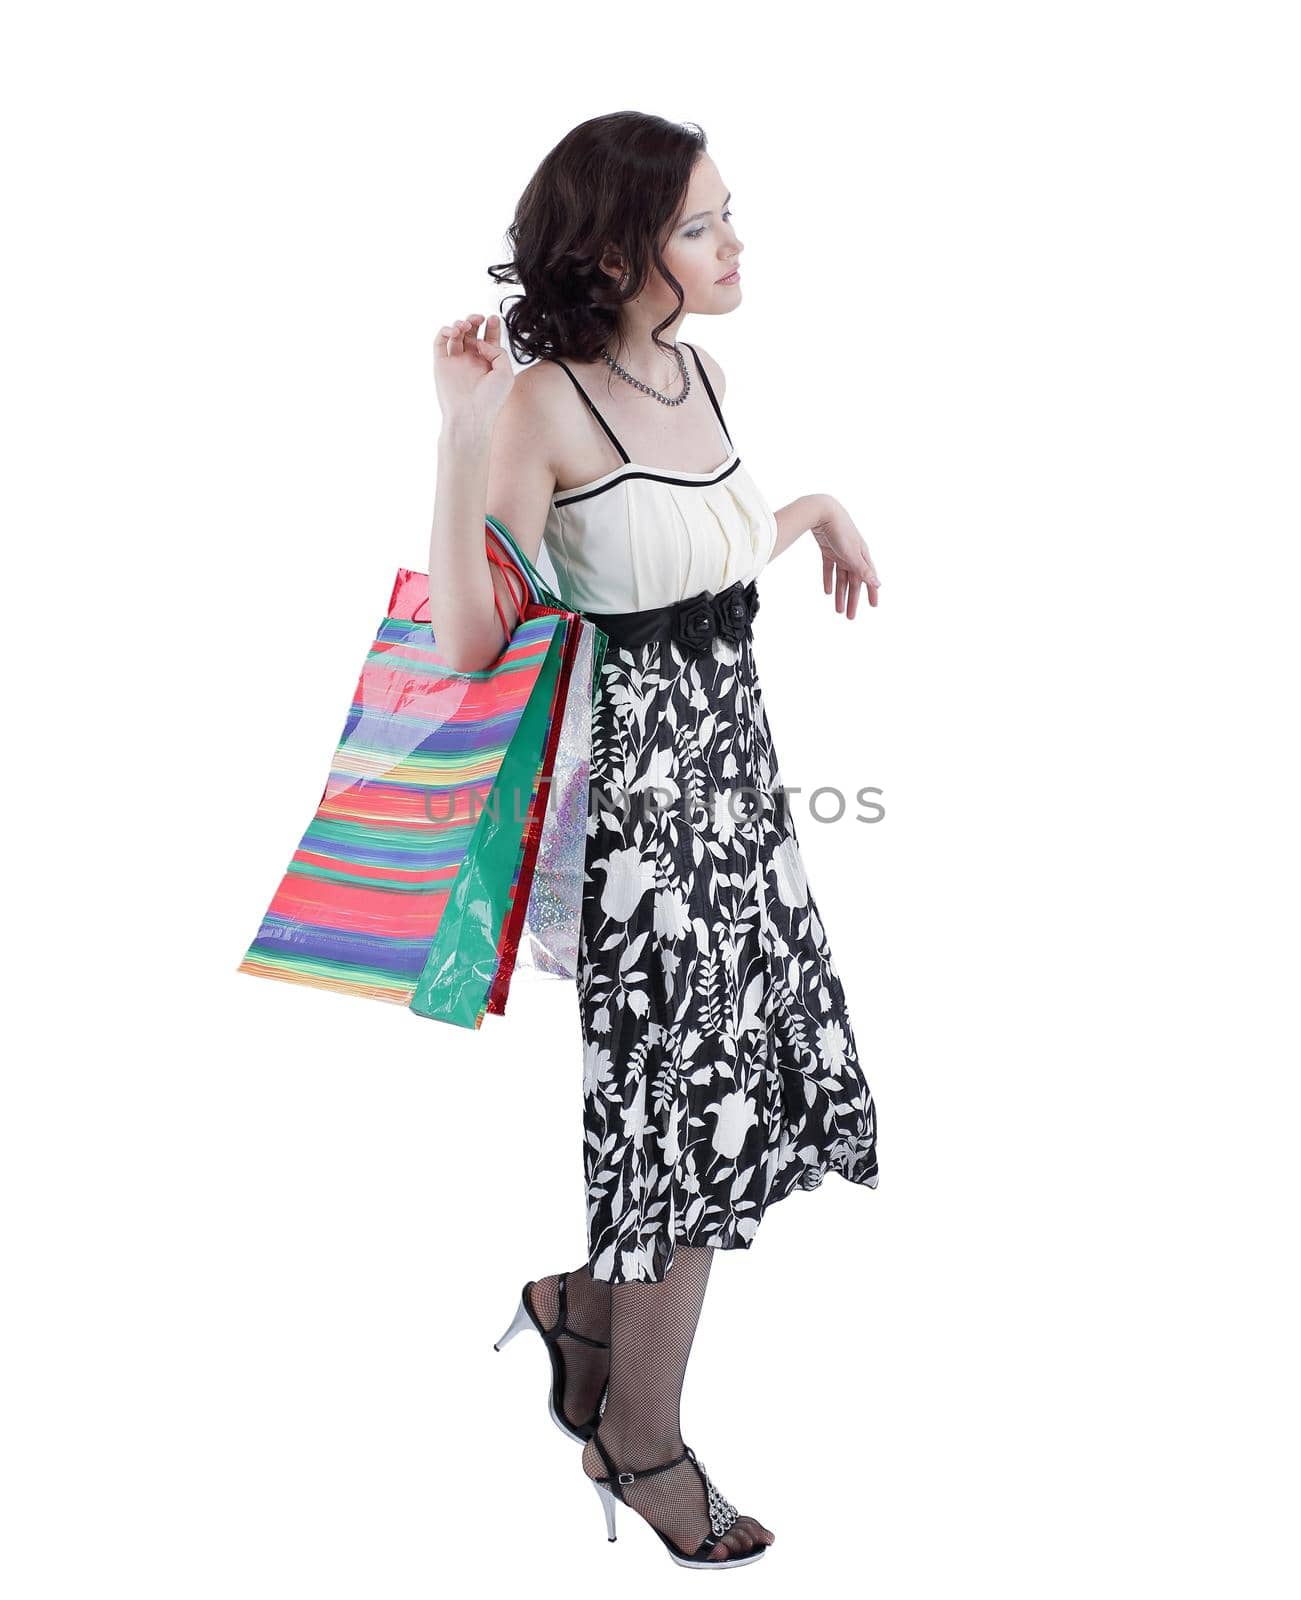 successful young woman with purchases going forward. by SmartPhotoLab